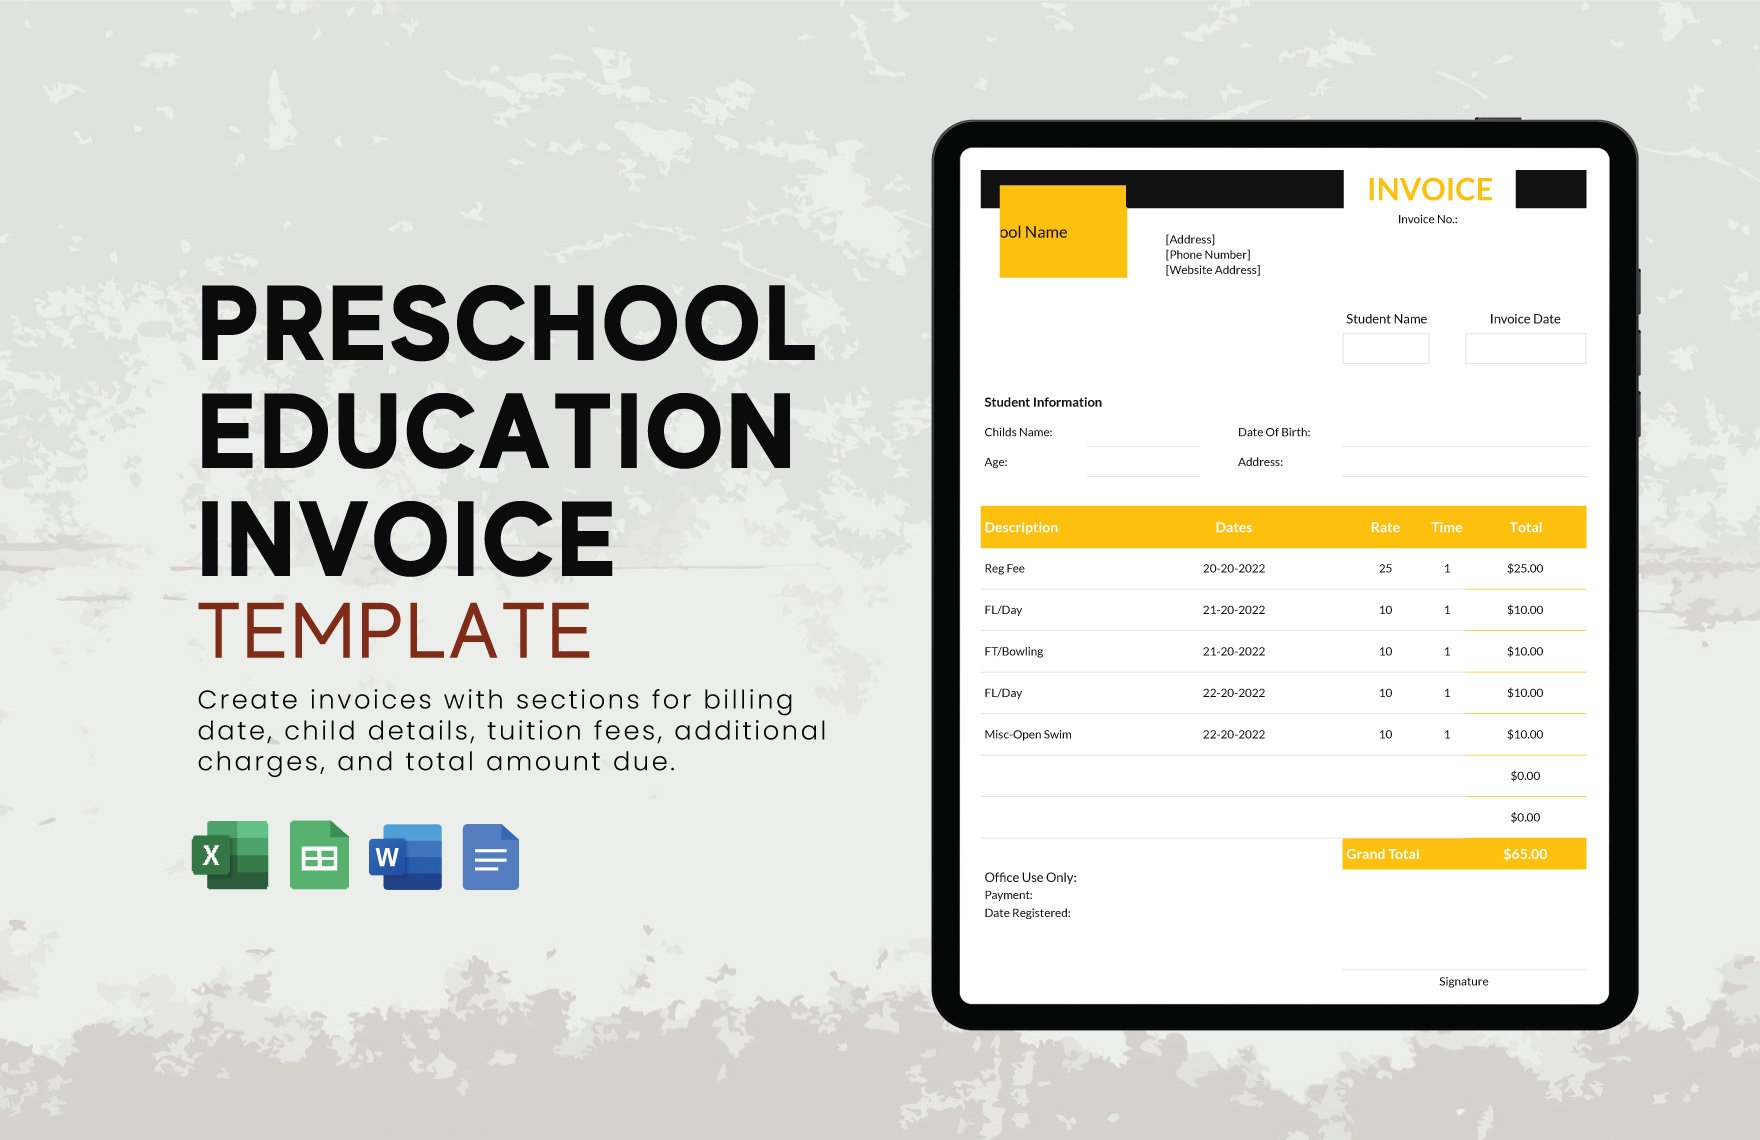 Preschool Education Invoice Template in Word, Google Docs, Excel, PDF, Google Sheets, Apple Pages, Apple Numbers